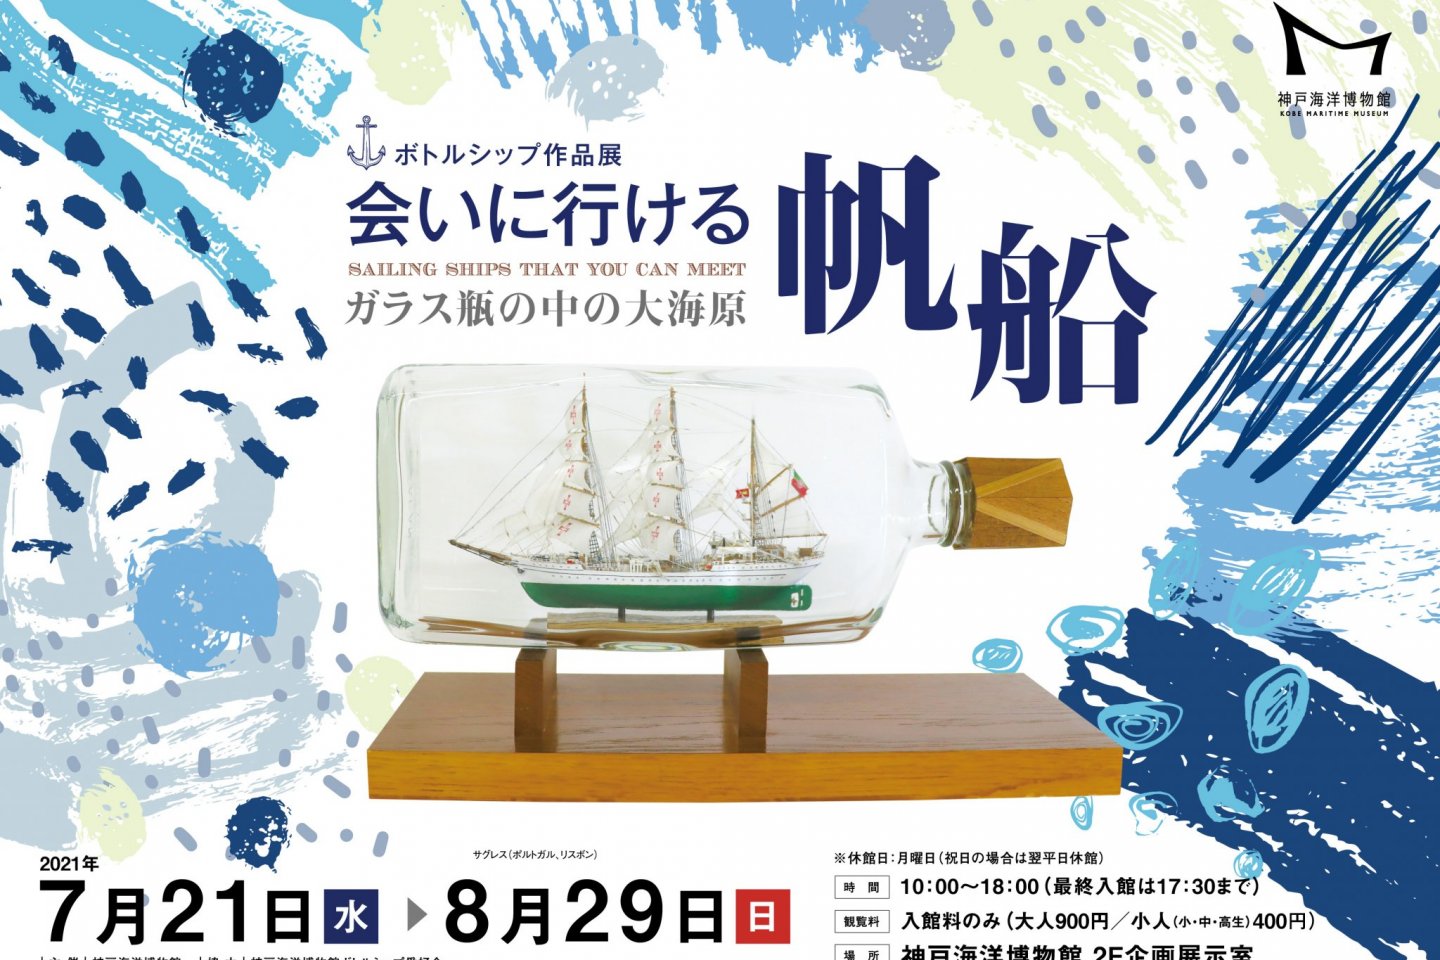 The bottleships on display will be of ships that are still in service, or ones that can be seen in a restored or preserved state